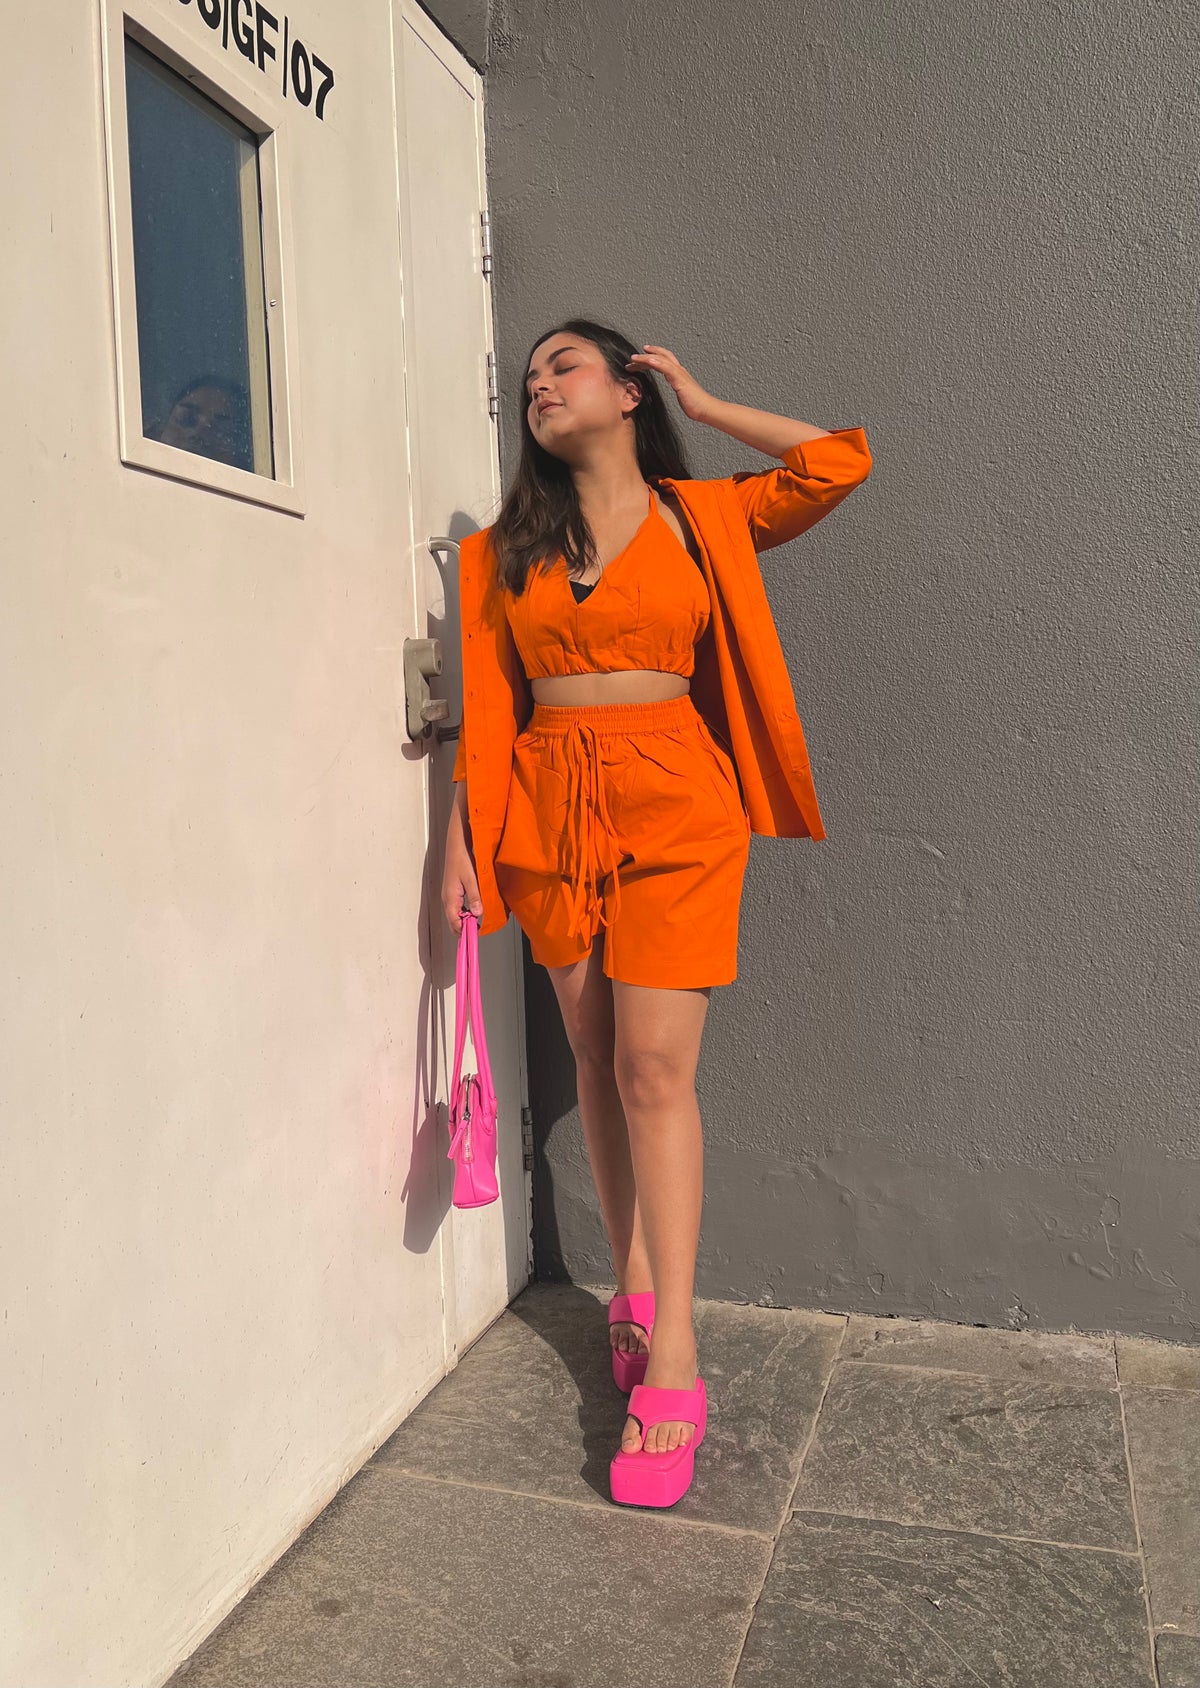 A hot orange co-ord set, the perfect outfit to make a bold fashion statement.